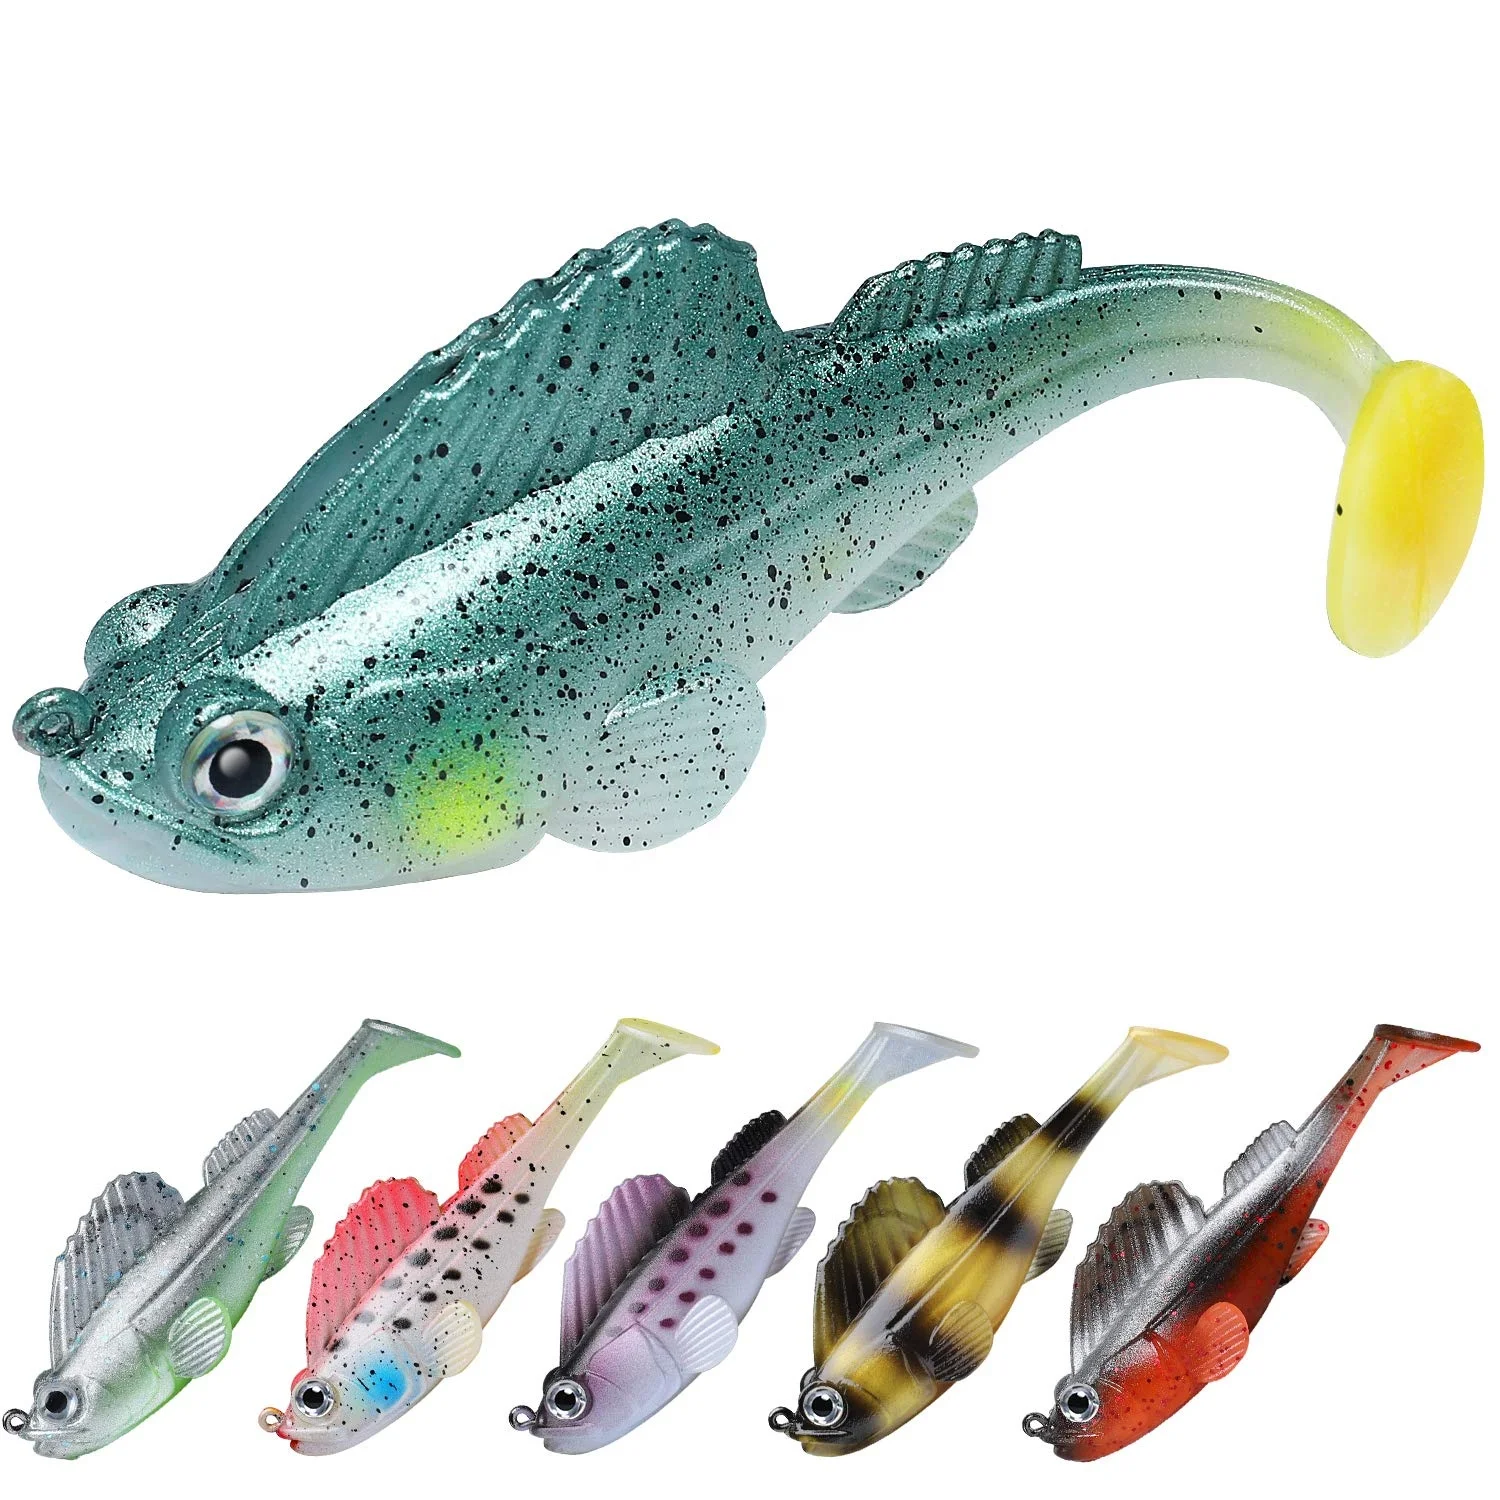 

TRUSCEND Pre-Rigged Jig Head Fishing Lures Big Weedless Swim Baits Lure with VMC Hook Spinner Trout Crappie Walleye Fishing Jigs, F1-3.5"-0.77oz